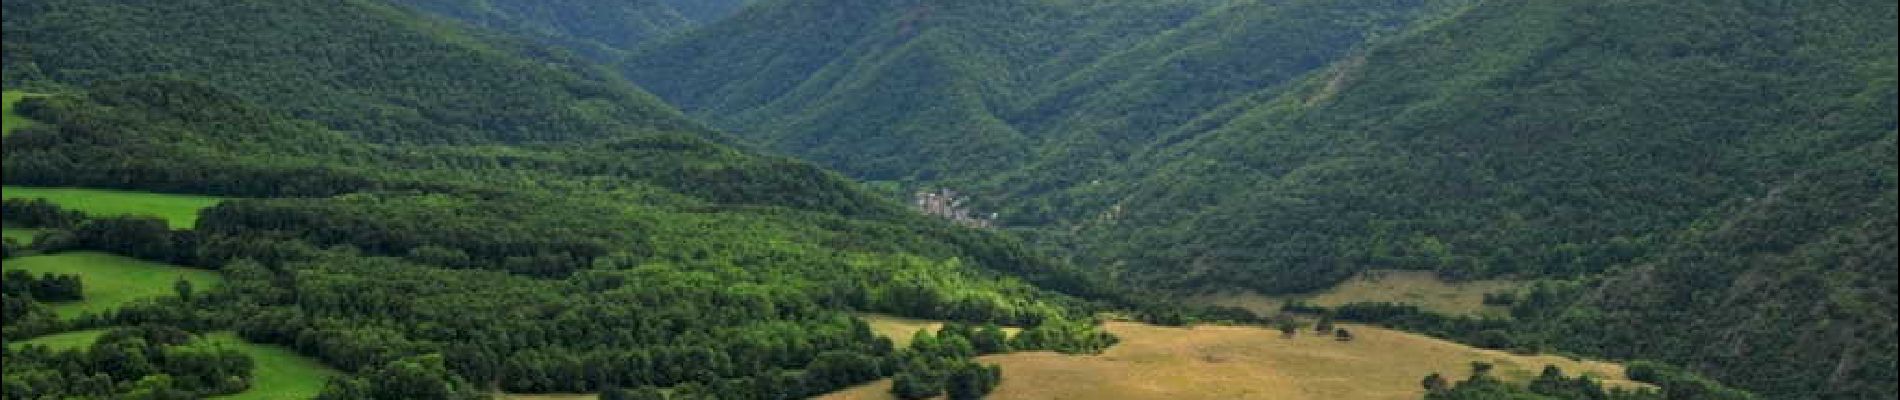 Trail Walking Courgoul - Courgoul_Chemin_Bergeres - Photo